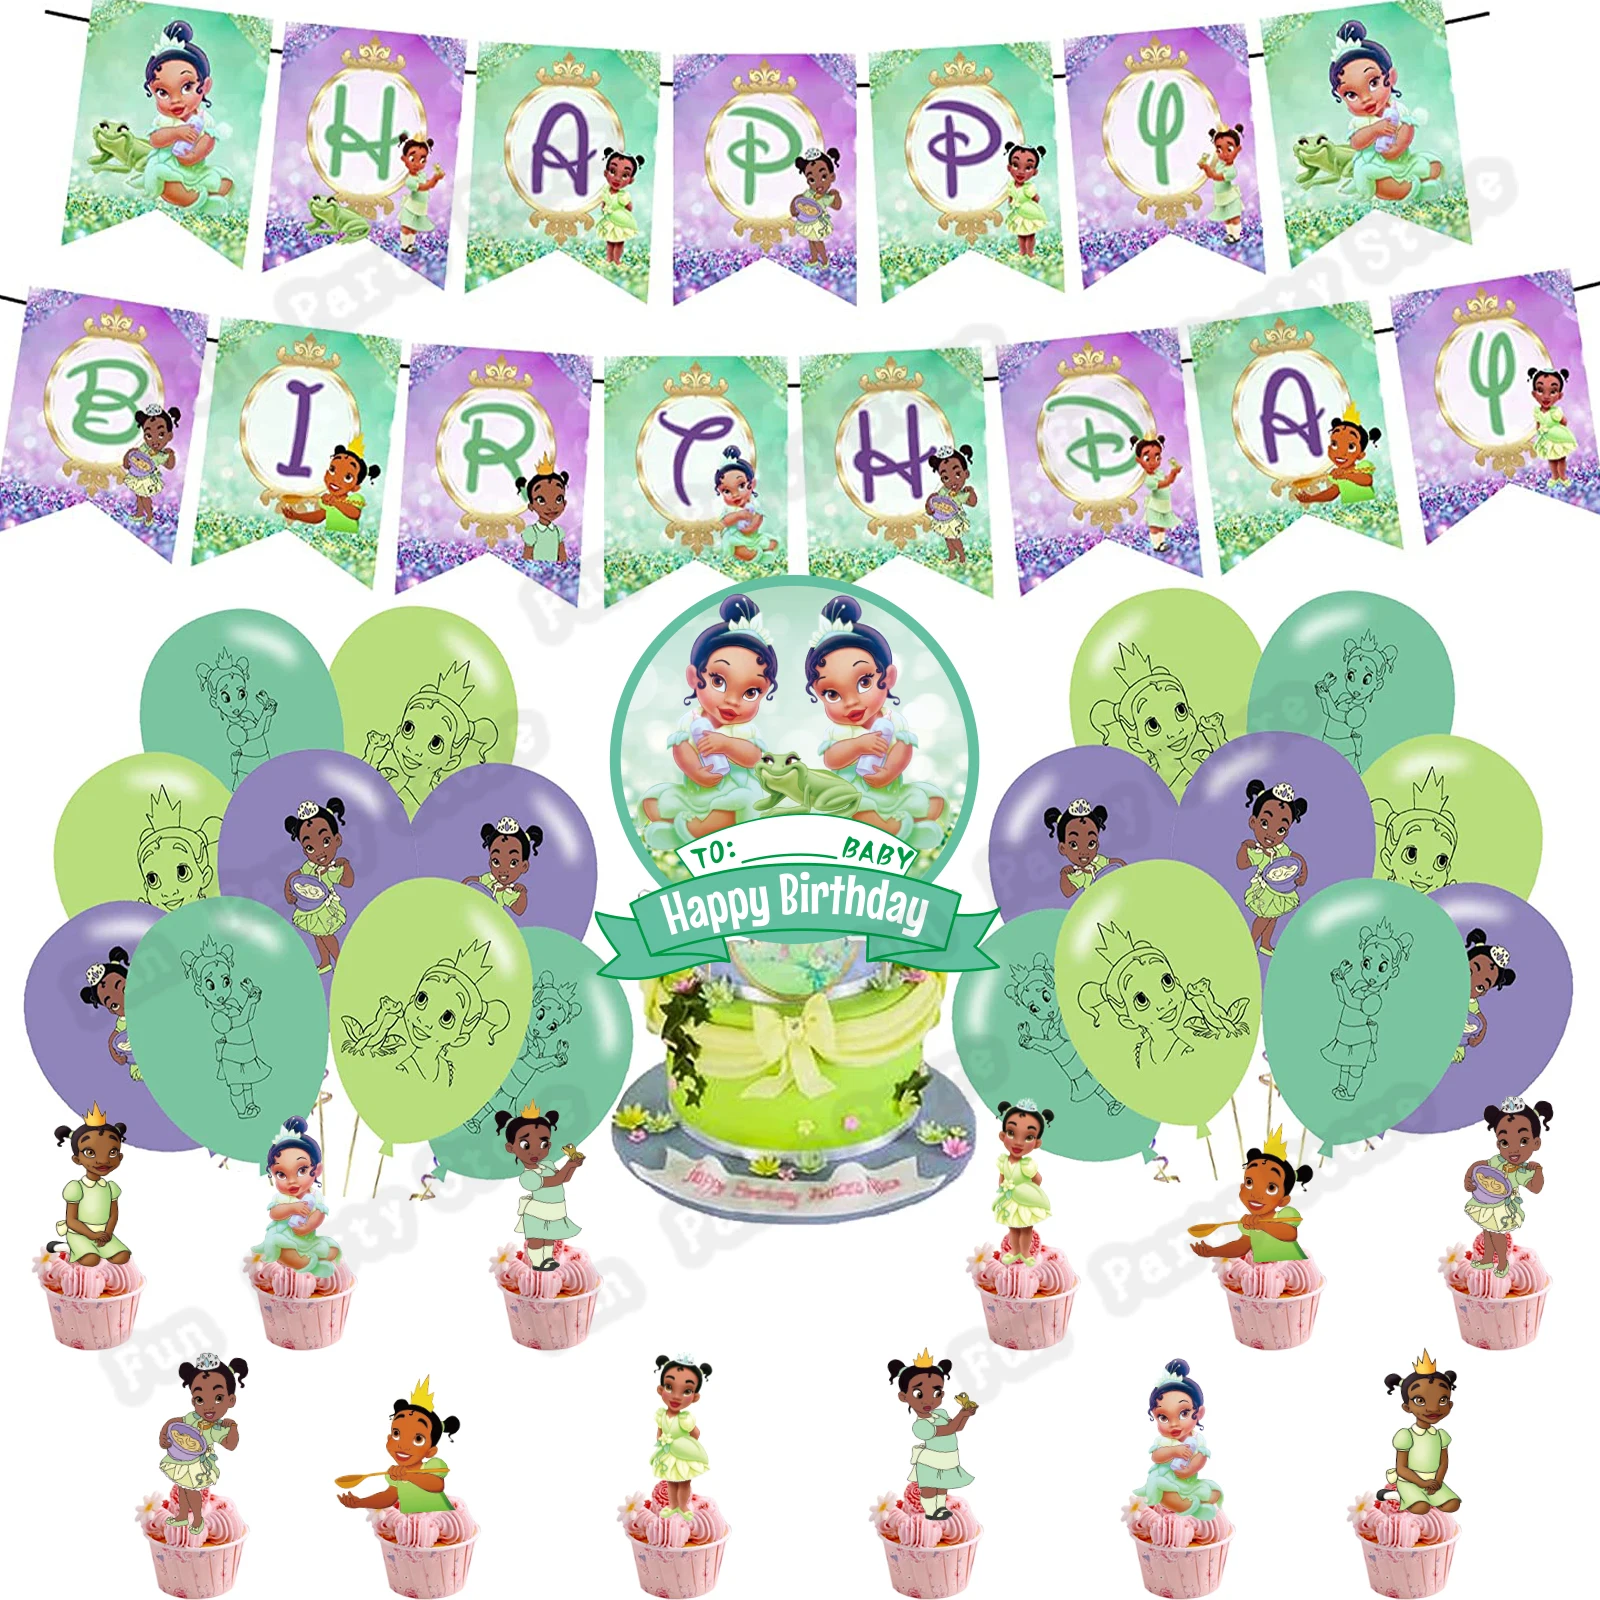 

Disney The Princess and the Frog Tiana Princess Balloons Banner Cake Topper Girl Birthday Party Decor Baby Shower Supplie Globos